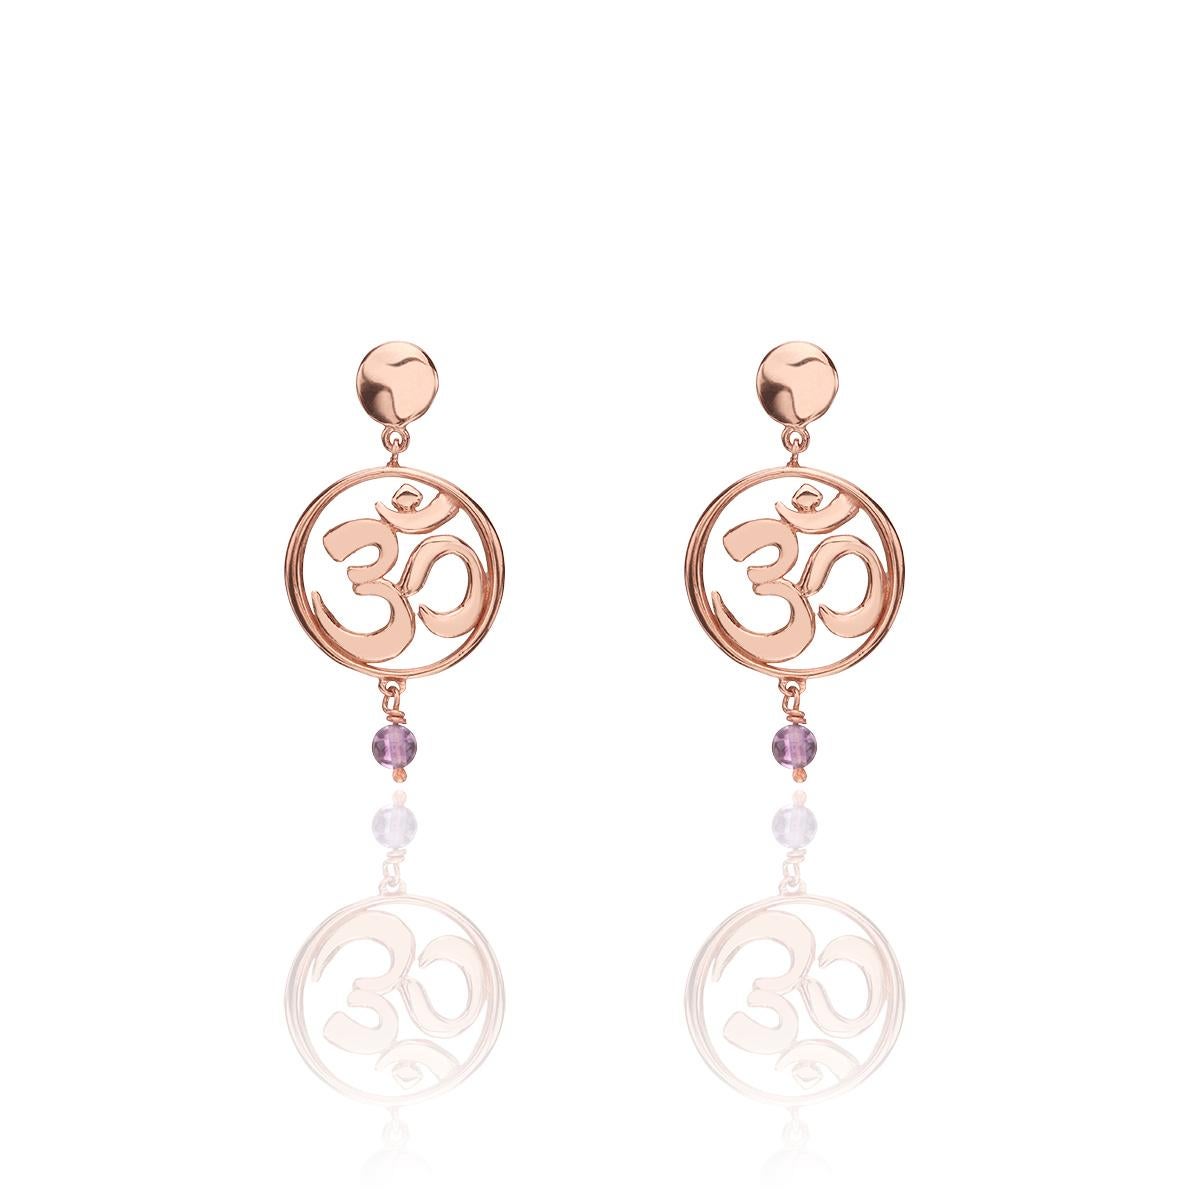 Unique pair of drop earrings inspired by Yoga Symbol OM handcrafted in 14Kt gold.
Om is the sound of universe and one of the most important spiritual symbols. Om symbolizes the past, the present and the future, however it has a different meaning for